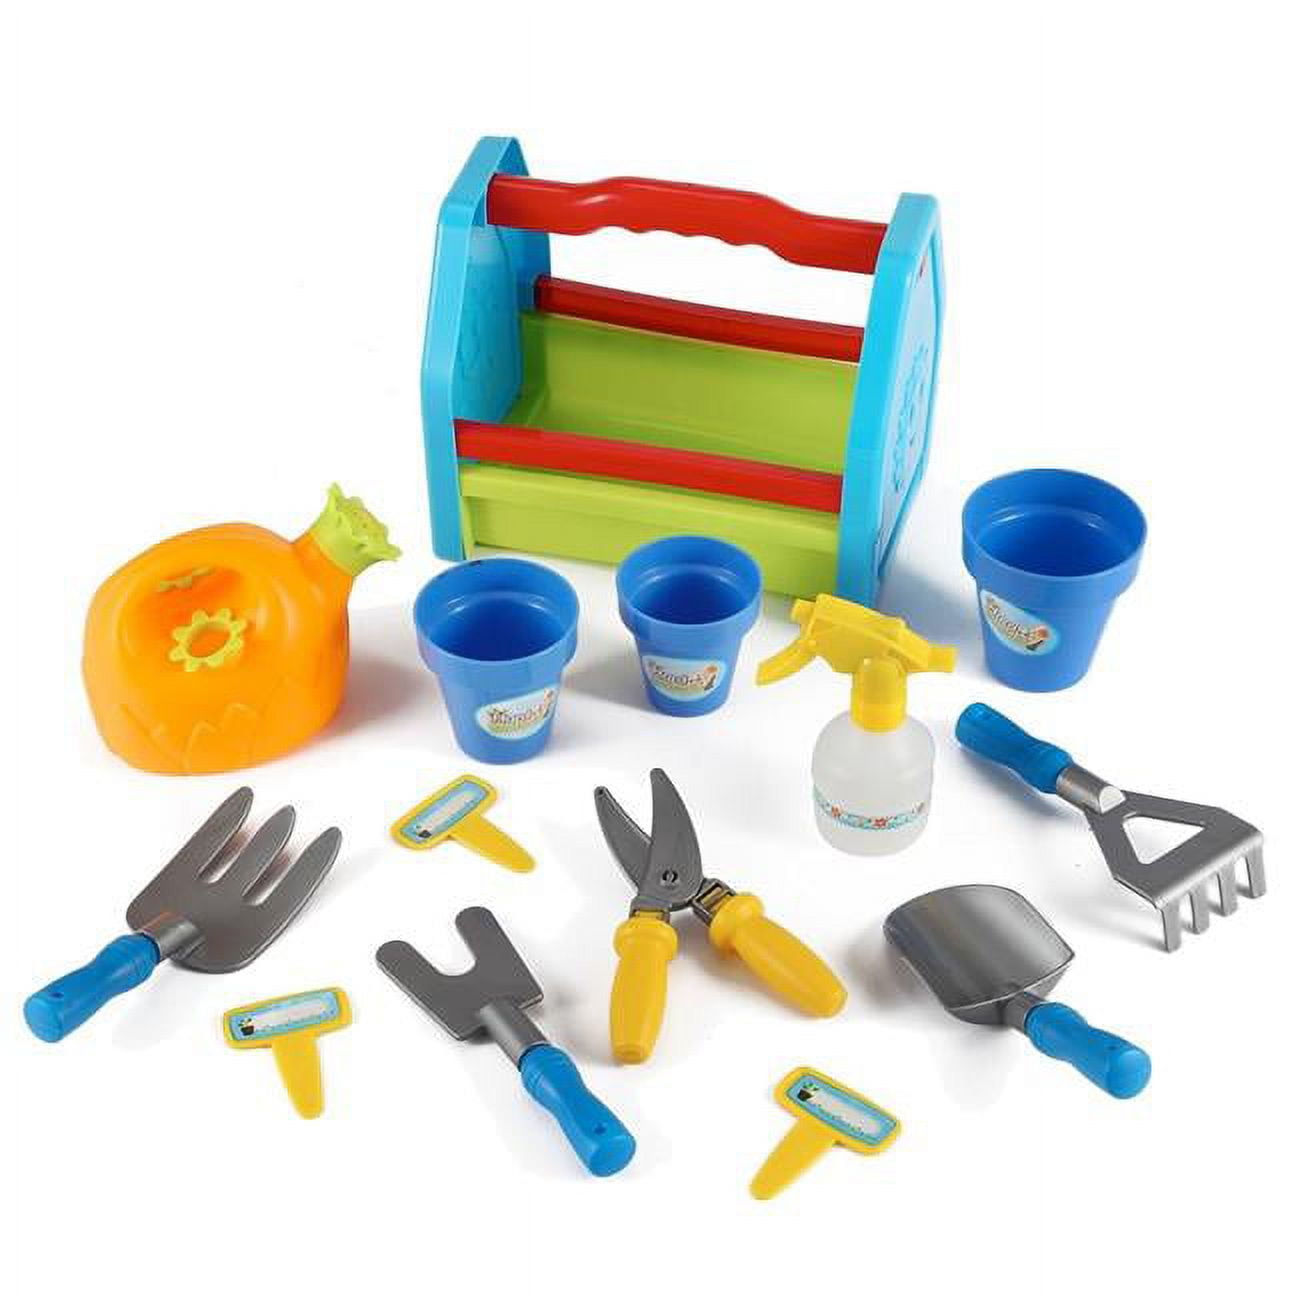 Picture of Azimport PS391 Rainbow Gardening 14 Piece Box Tools Toy Set for Kids